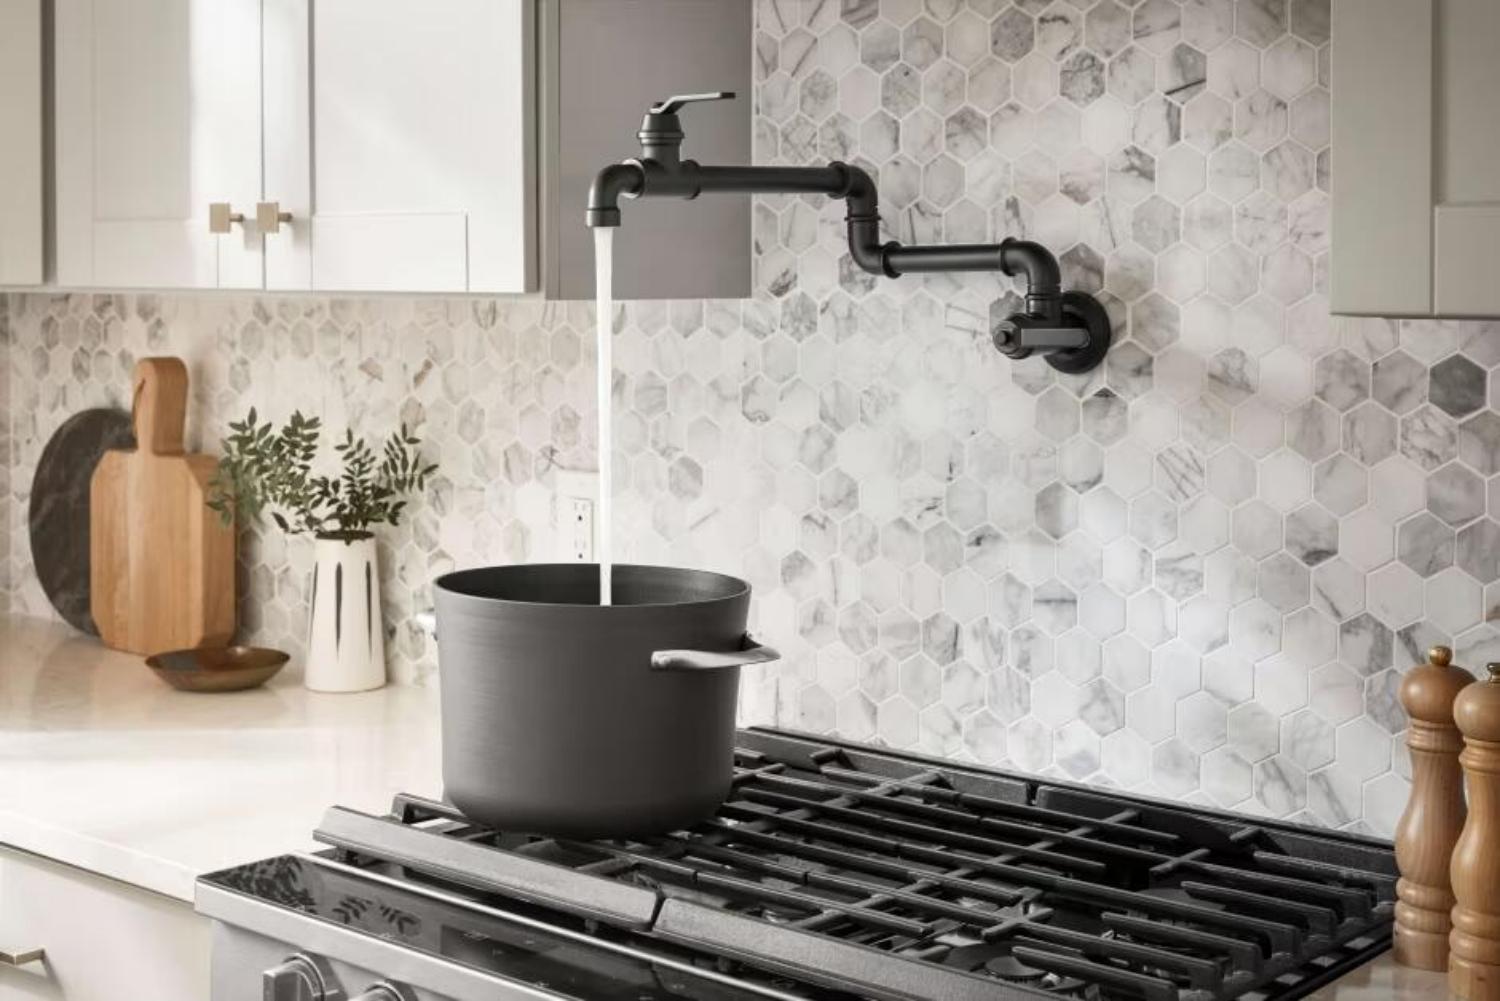 Install A Pot Filler Faucet: A Stylish and Functional Addition - Blog - 3